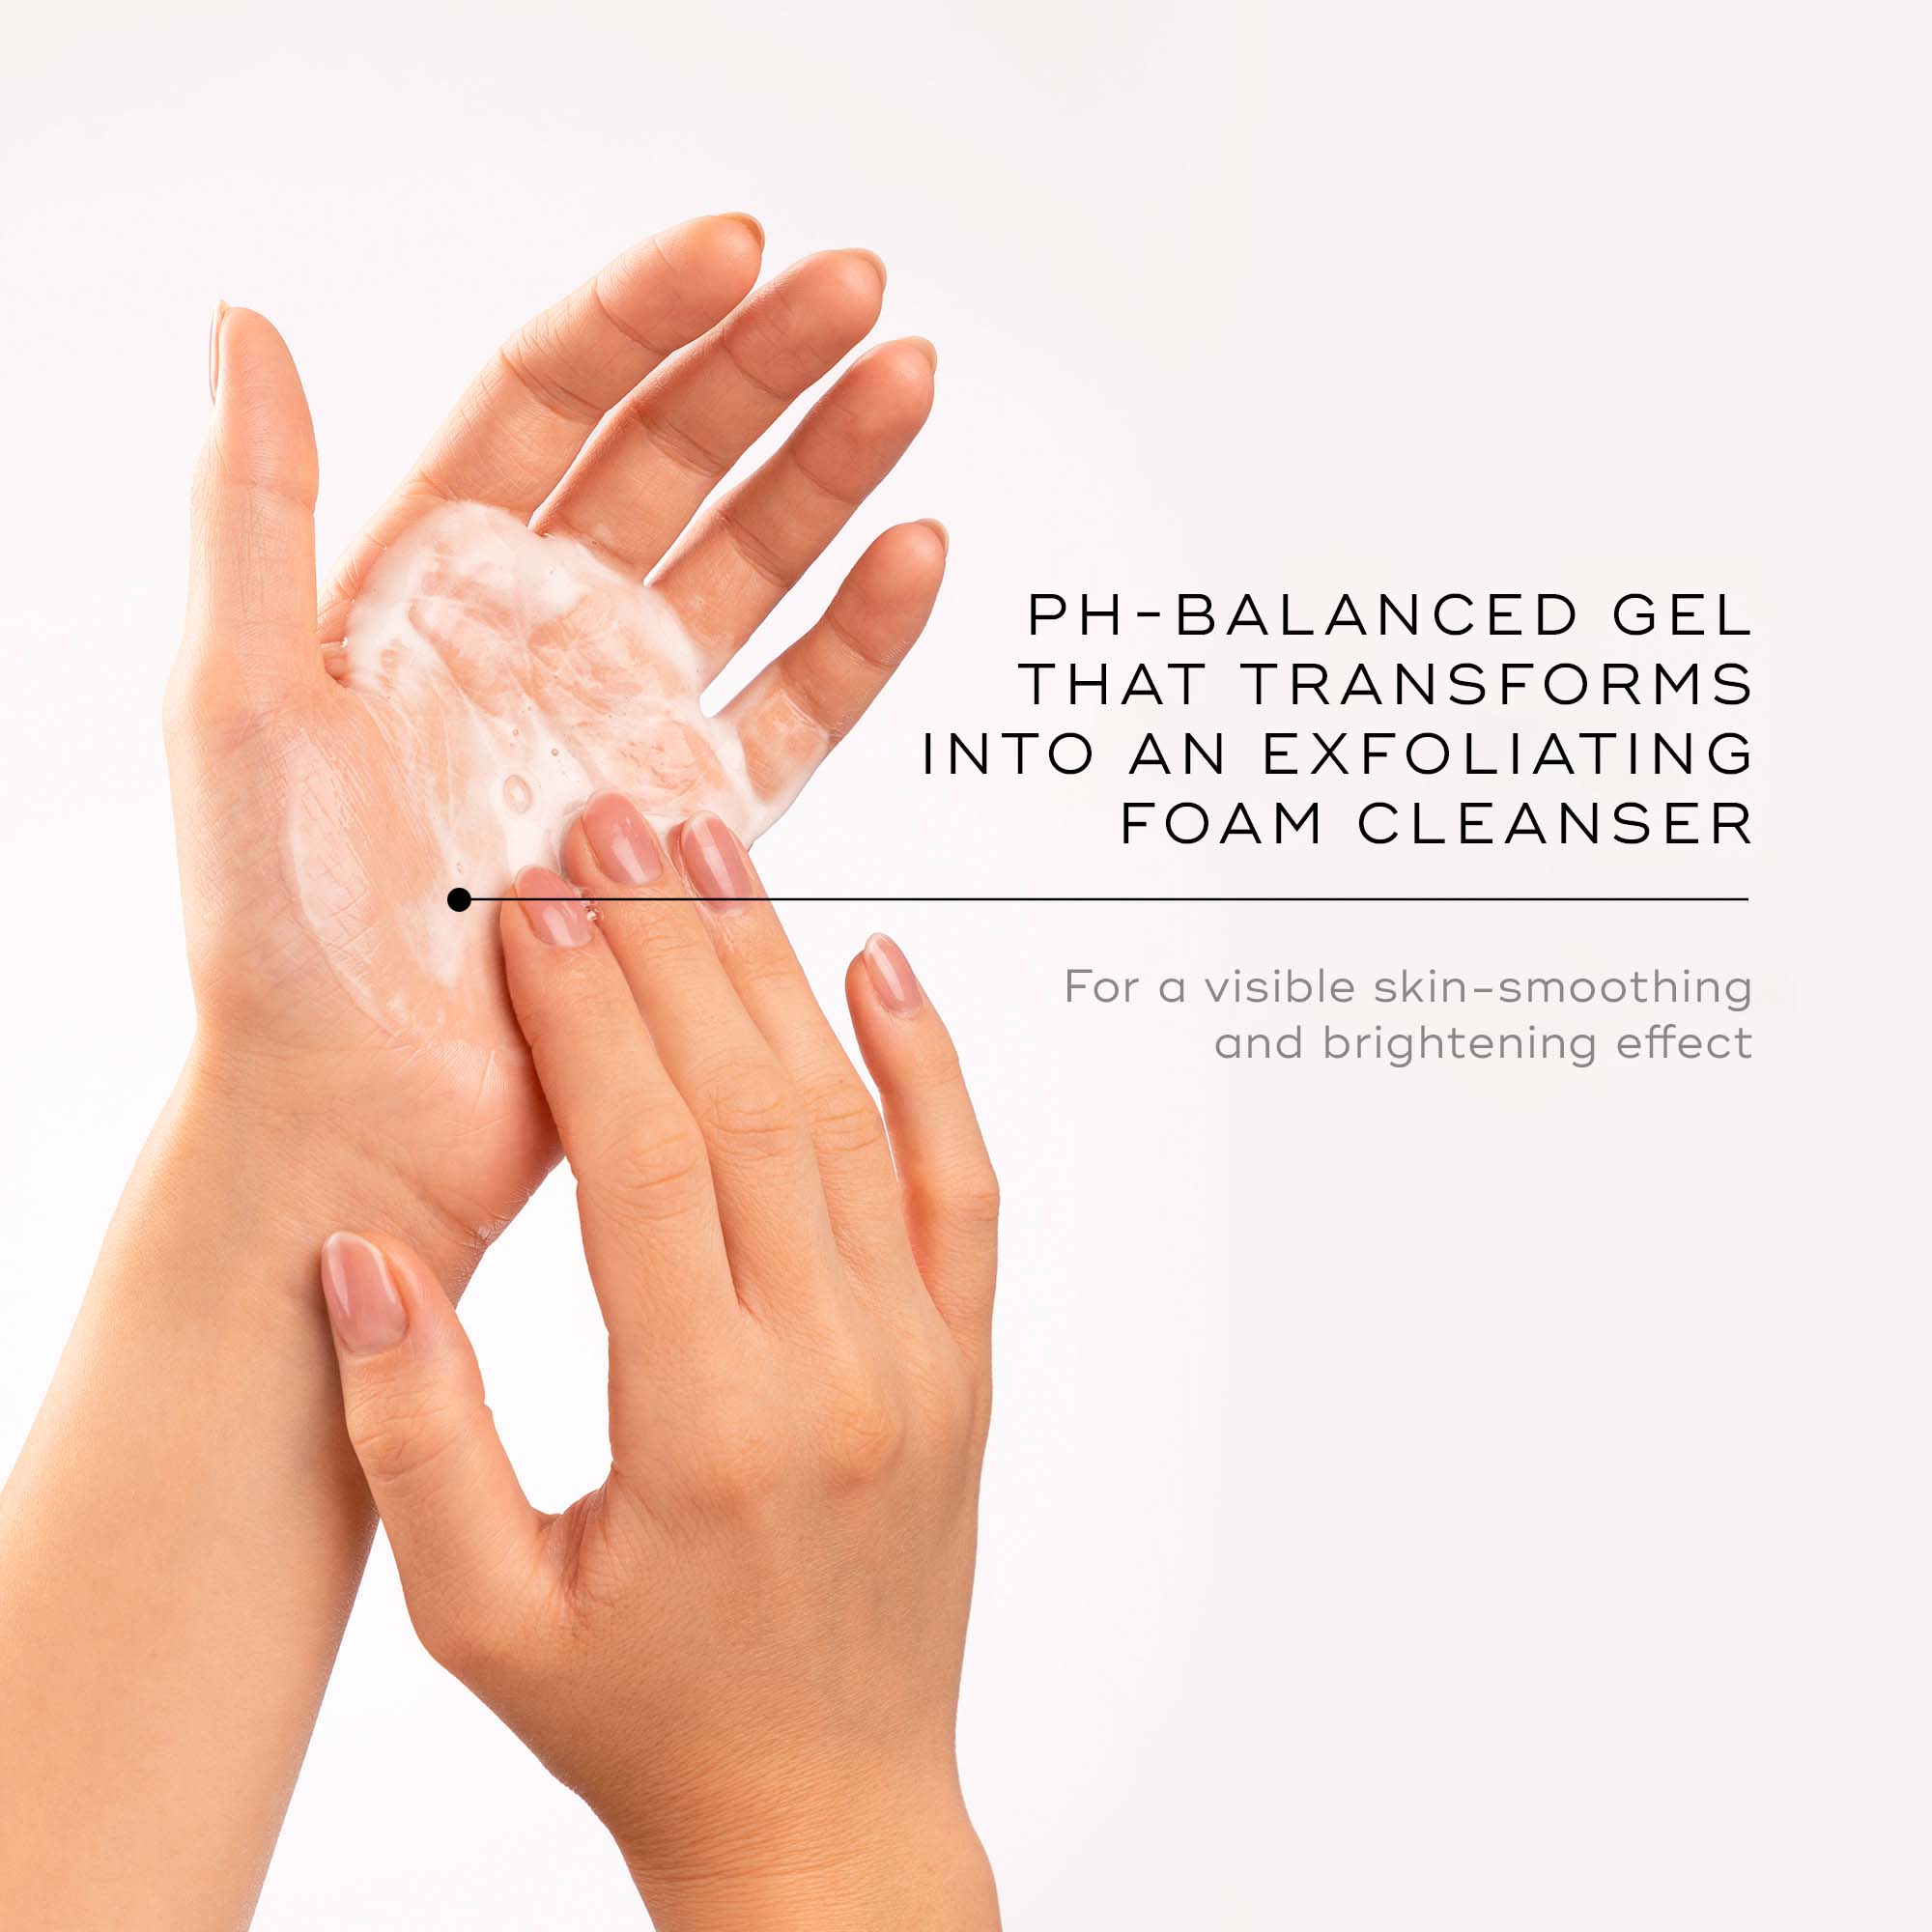 Surface Radiance Cleanse™